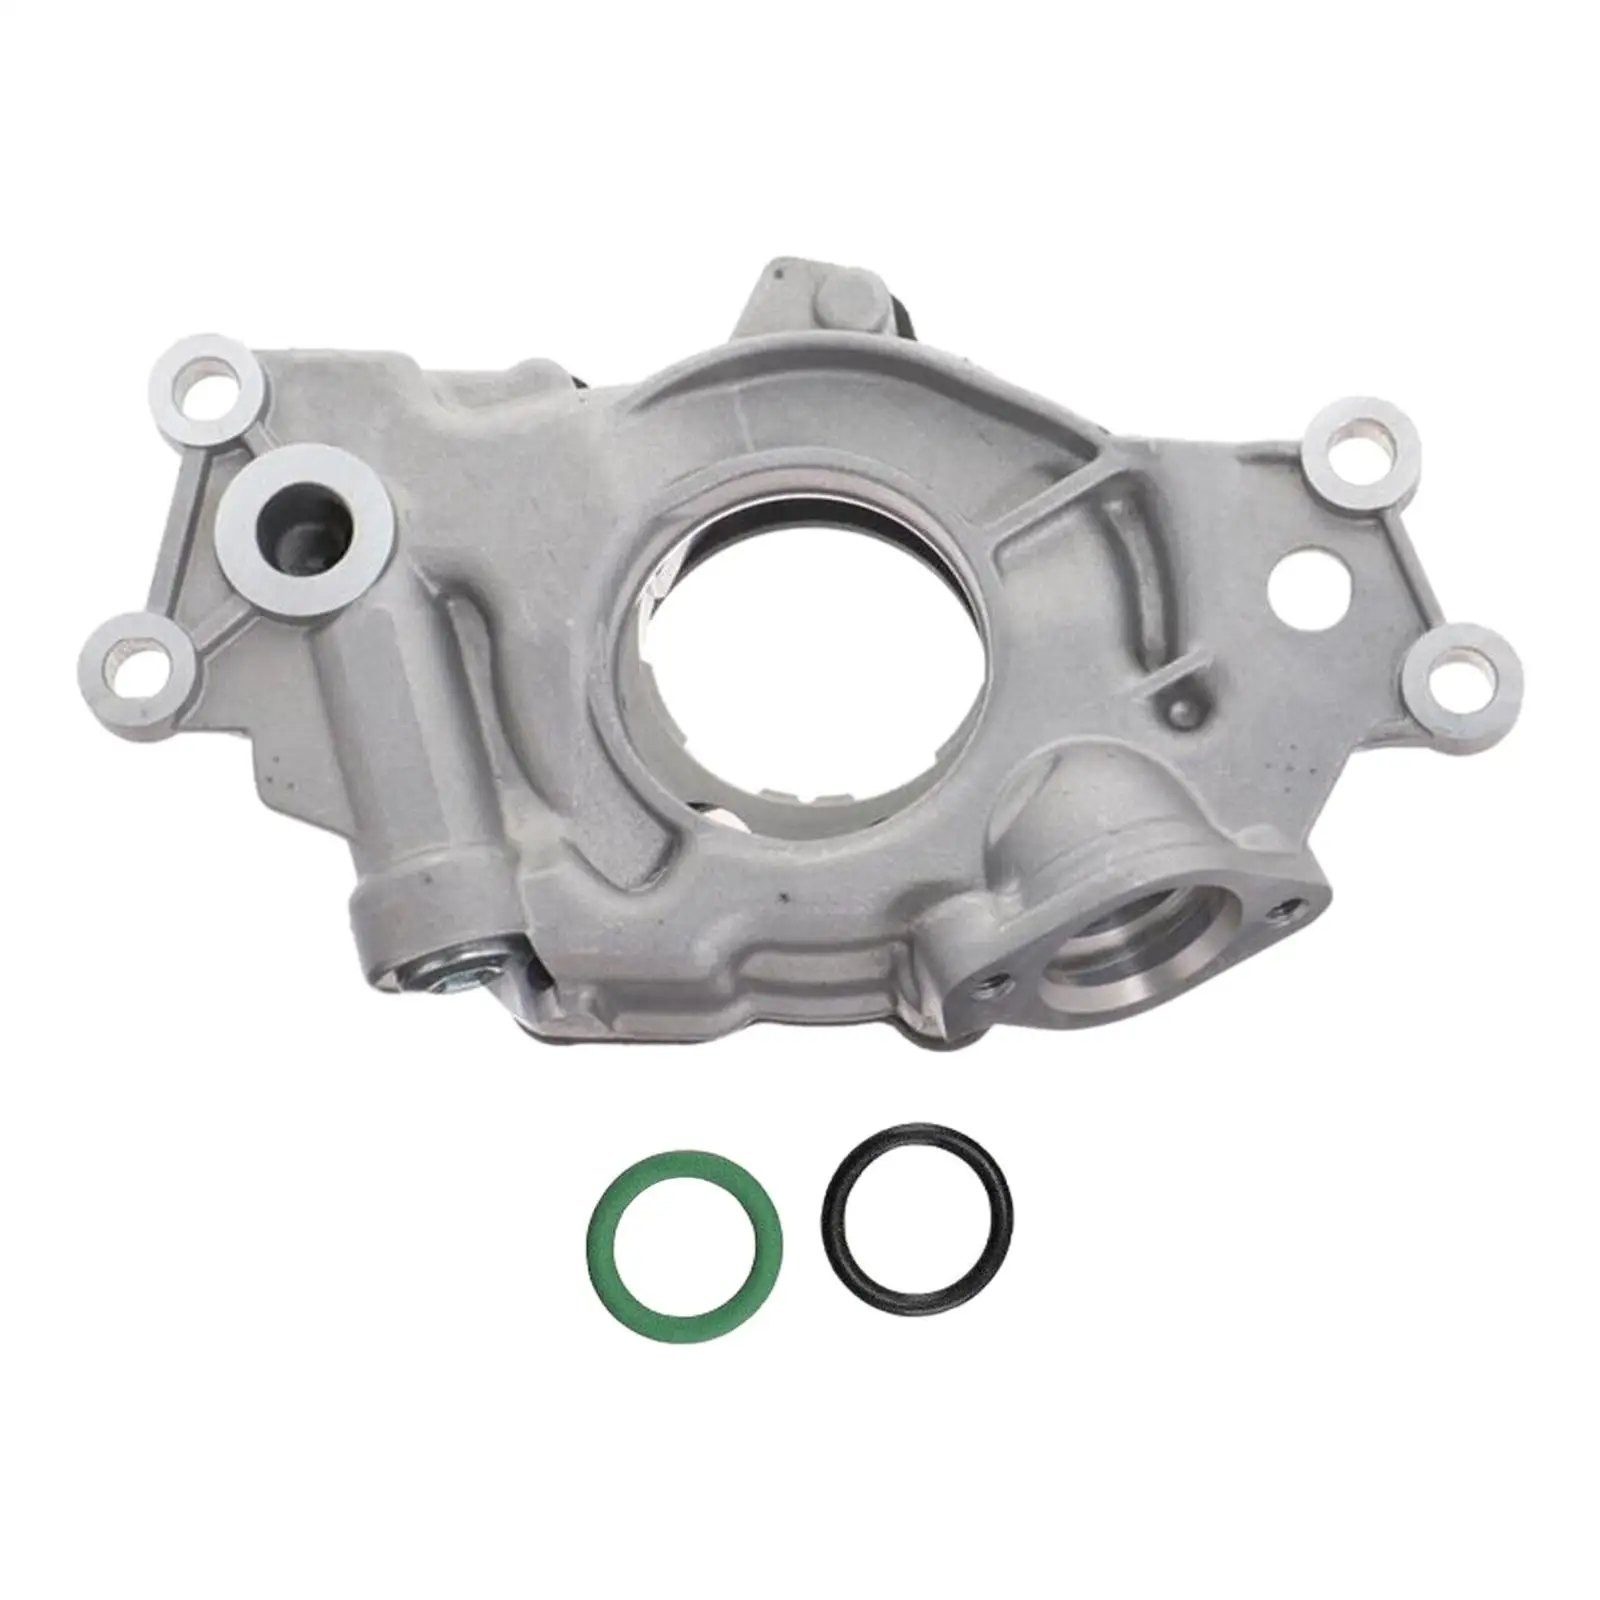 Oil Pump Replacement Quality Easy Installation Auto Accessories for Gen 4 Ls-based Engines 5.3L 6.0L 6.2L L94 Lsa LH9 Lmf